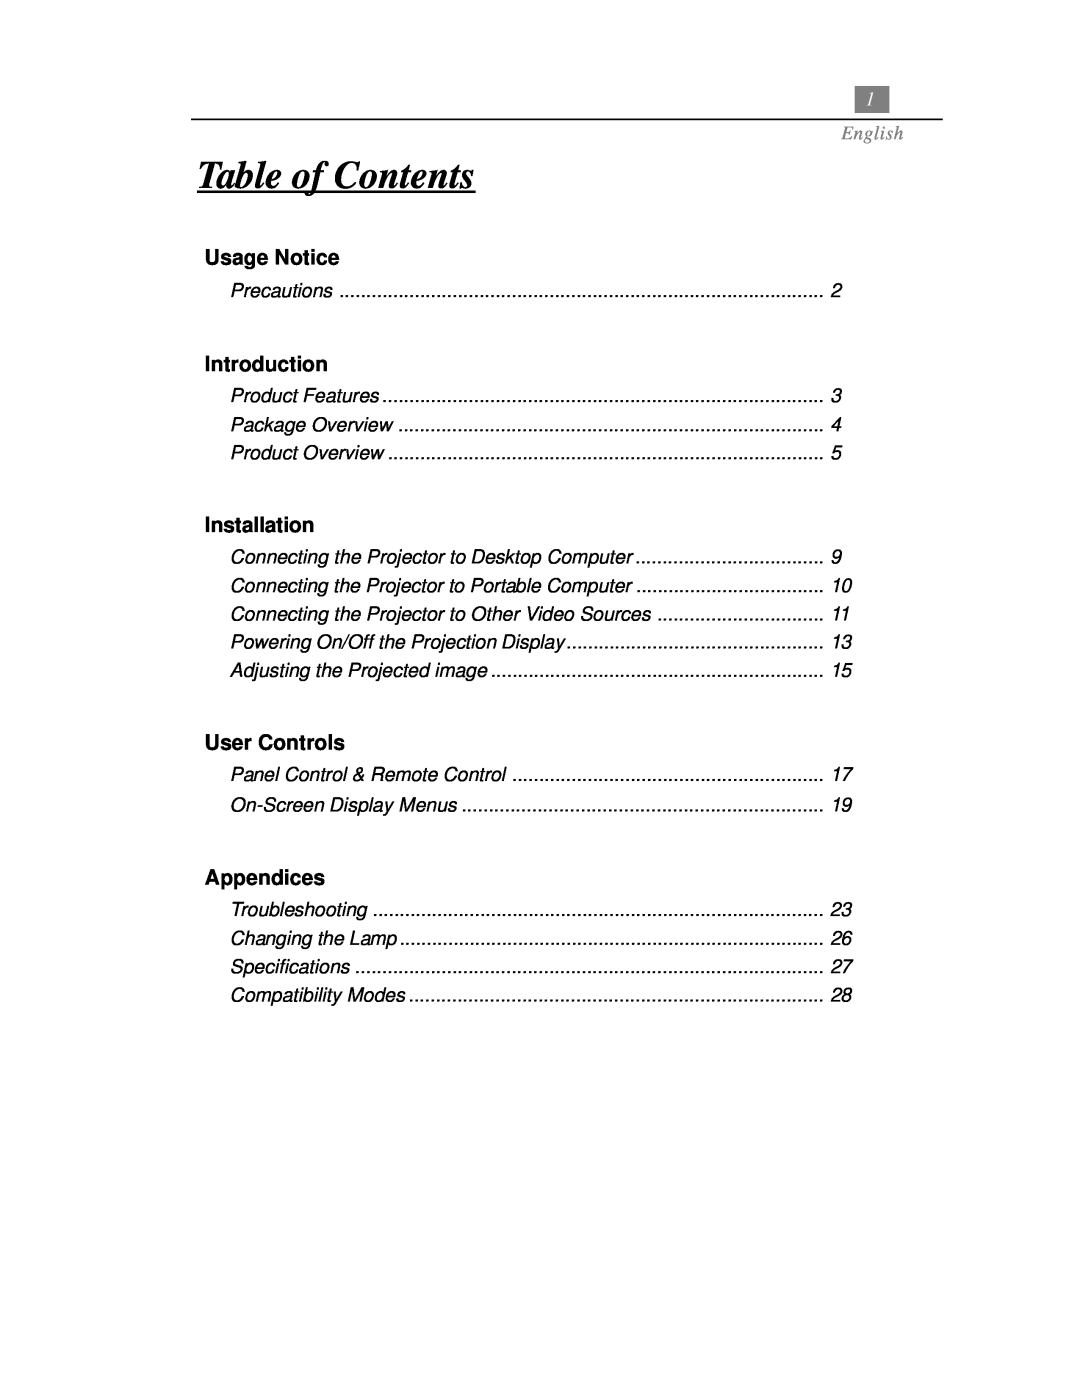 Optoma Technology EP718 specifications Table of Contents, Usage Notice, Introduction, Installation, User Controls, English 